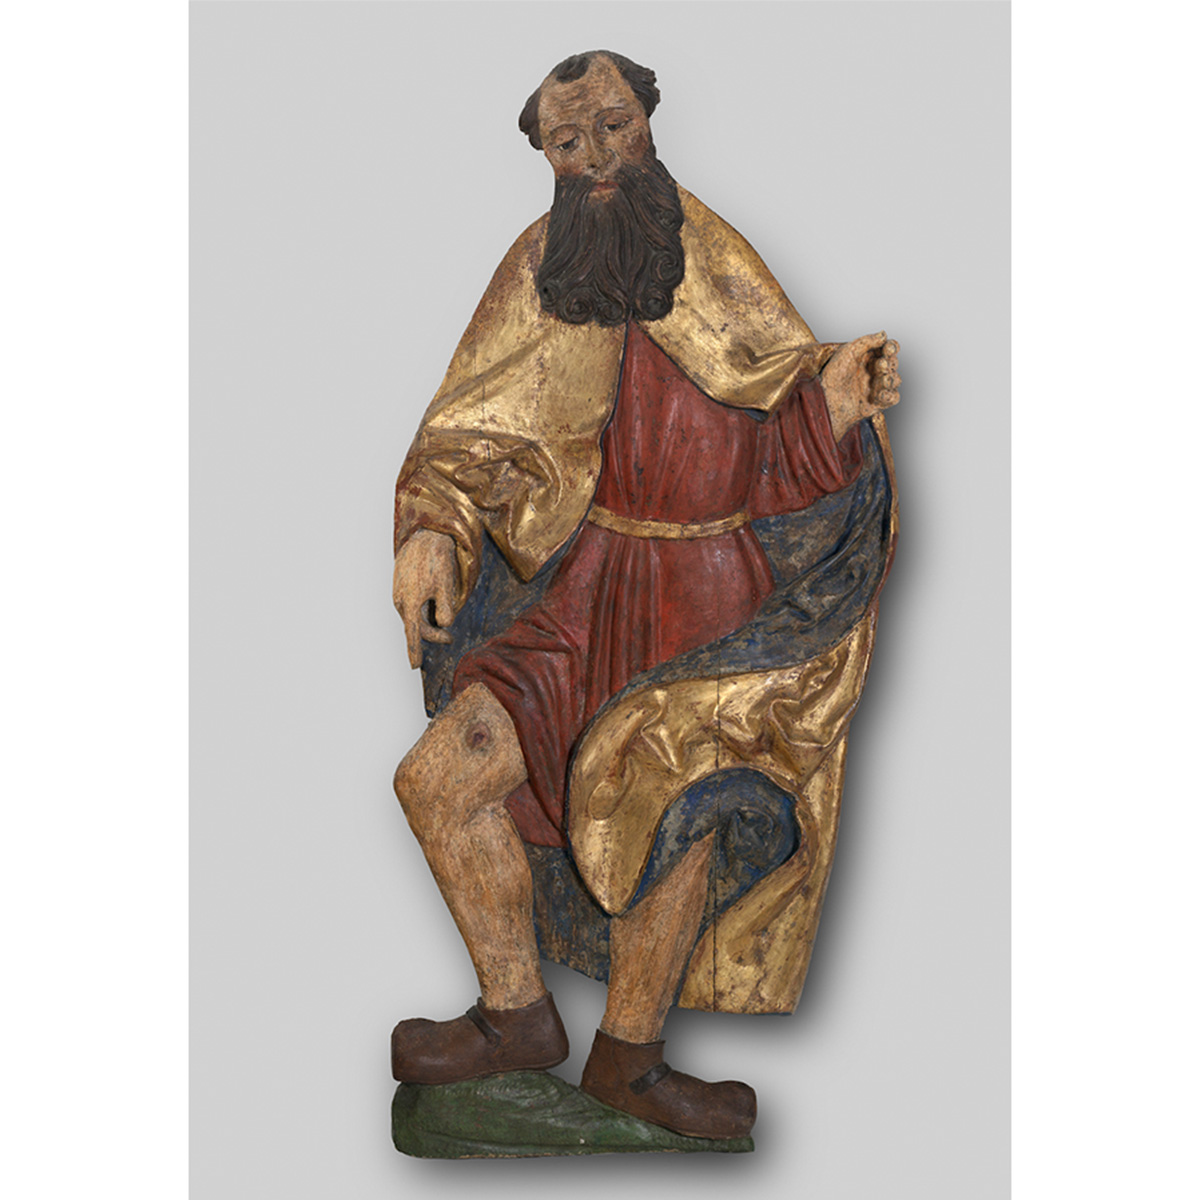 Painted wooden sculpture of a front facing jolly man in red and gold robes.